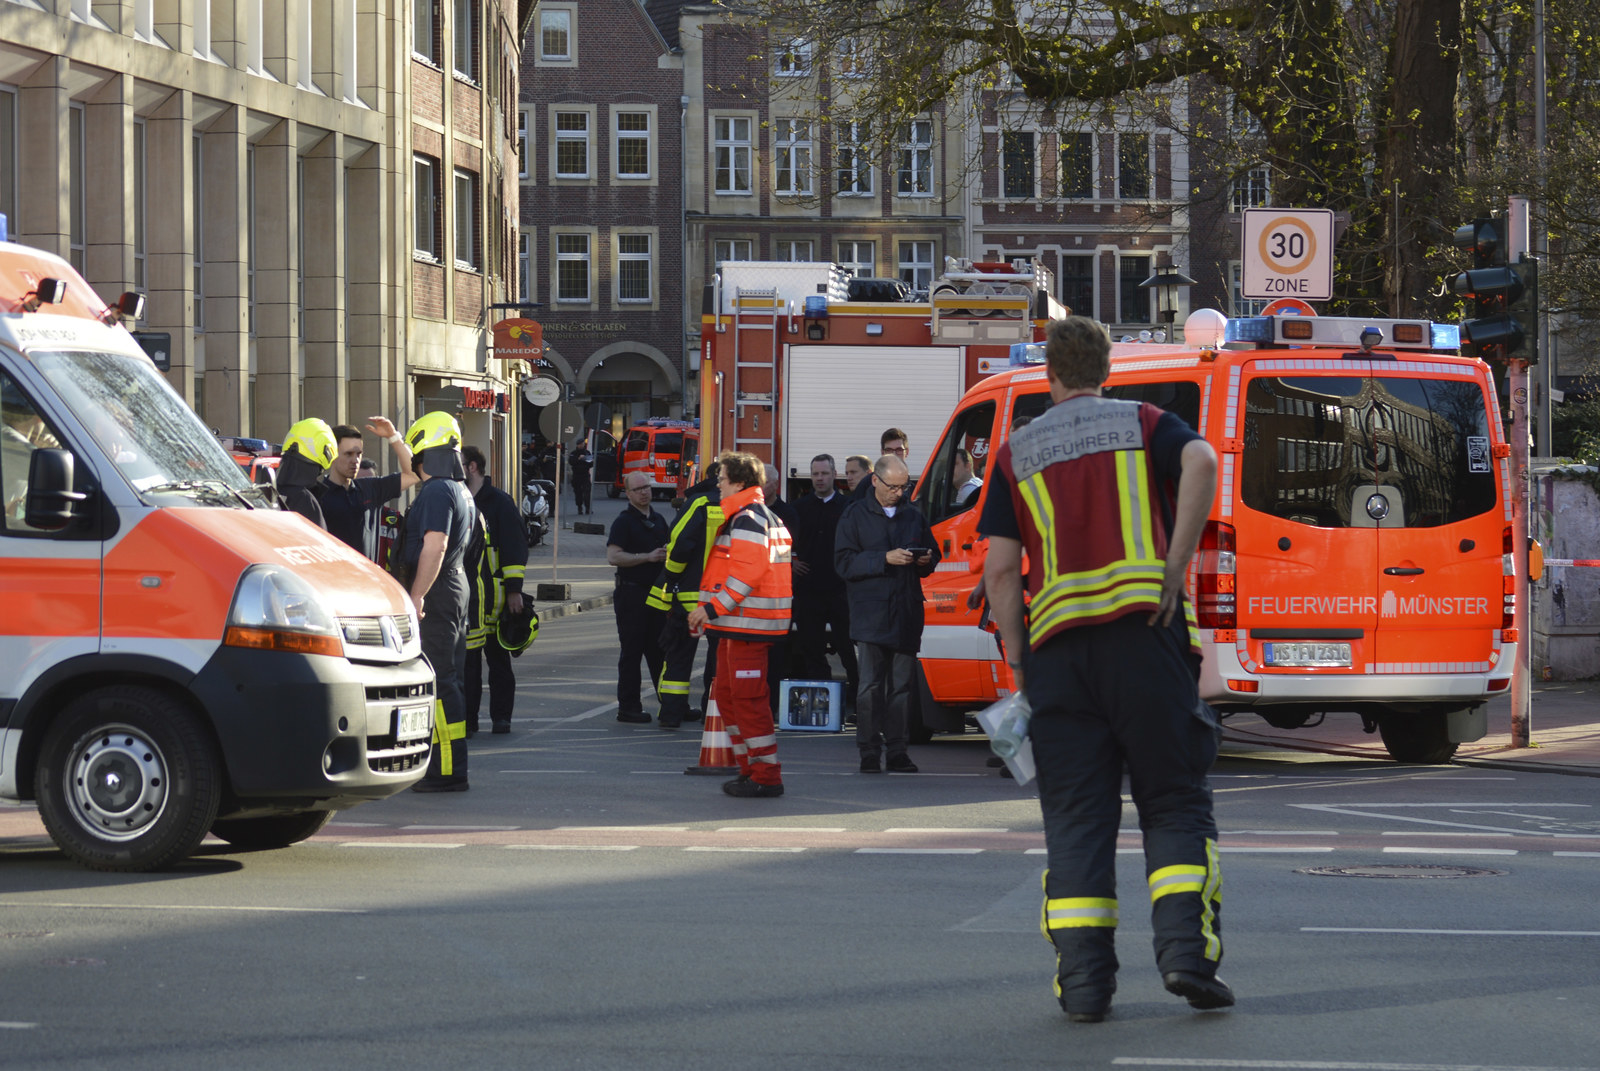 A Vehicle Has Struck A Crowd In The German City Of Muenster, Leaving ...